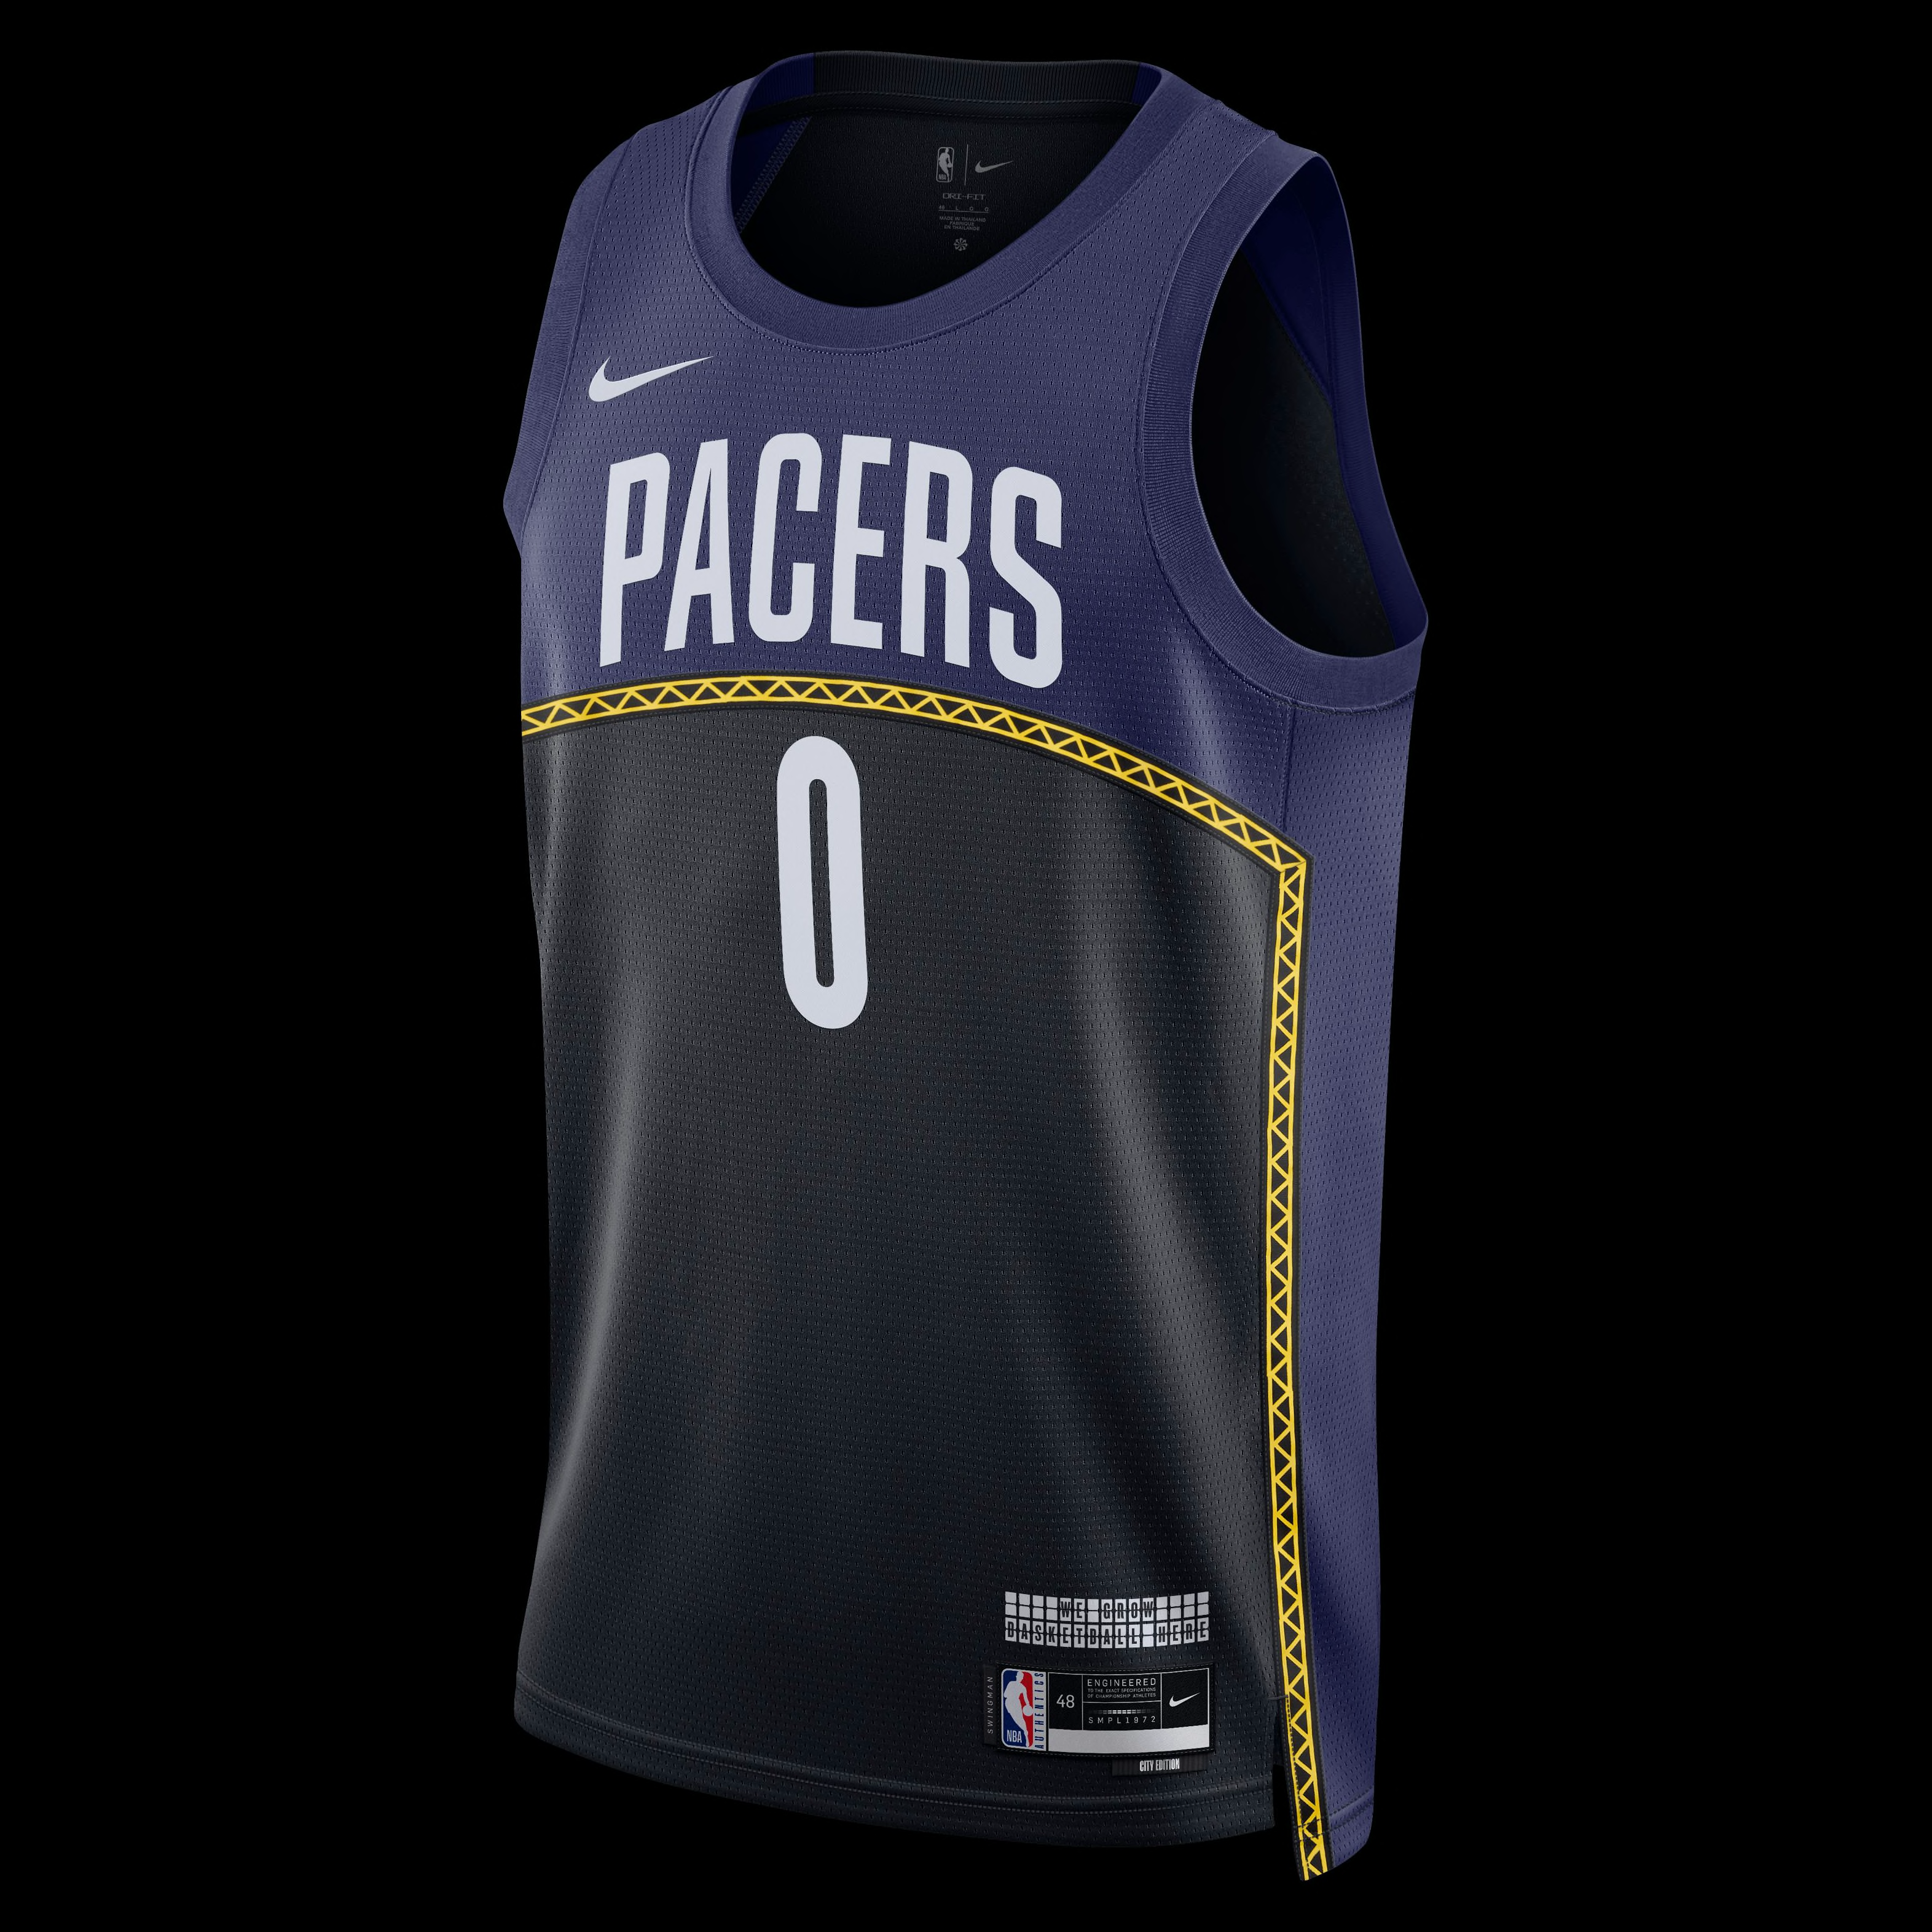 Pacers uniforms through the years